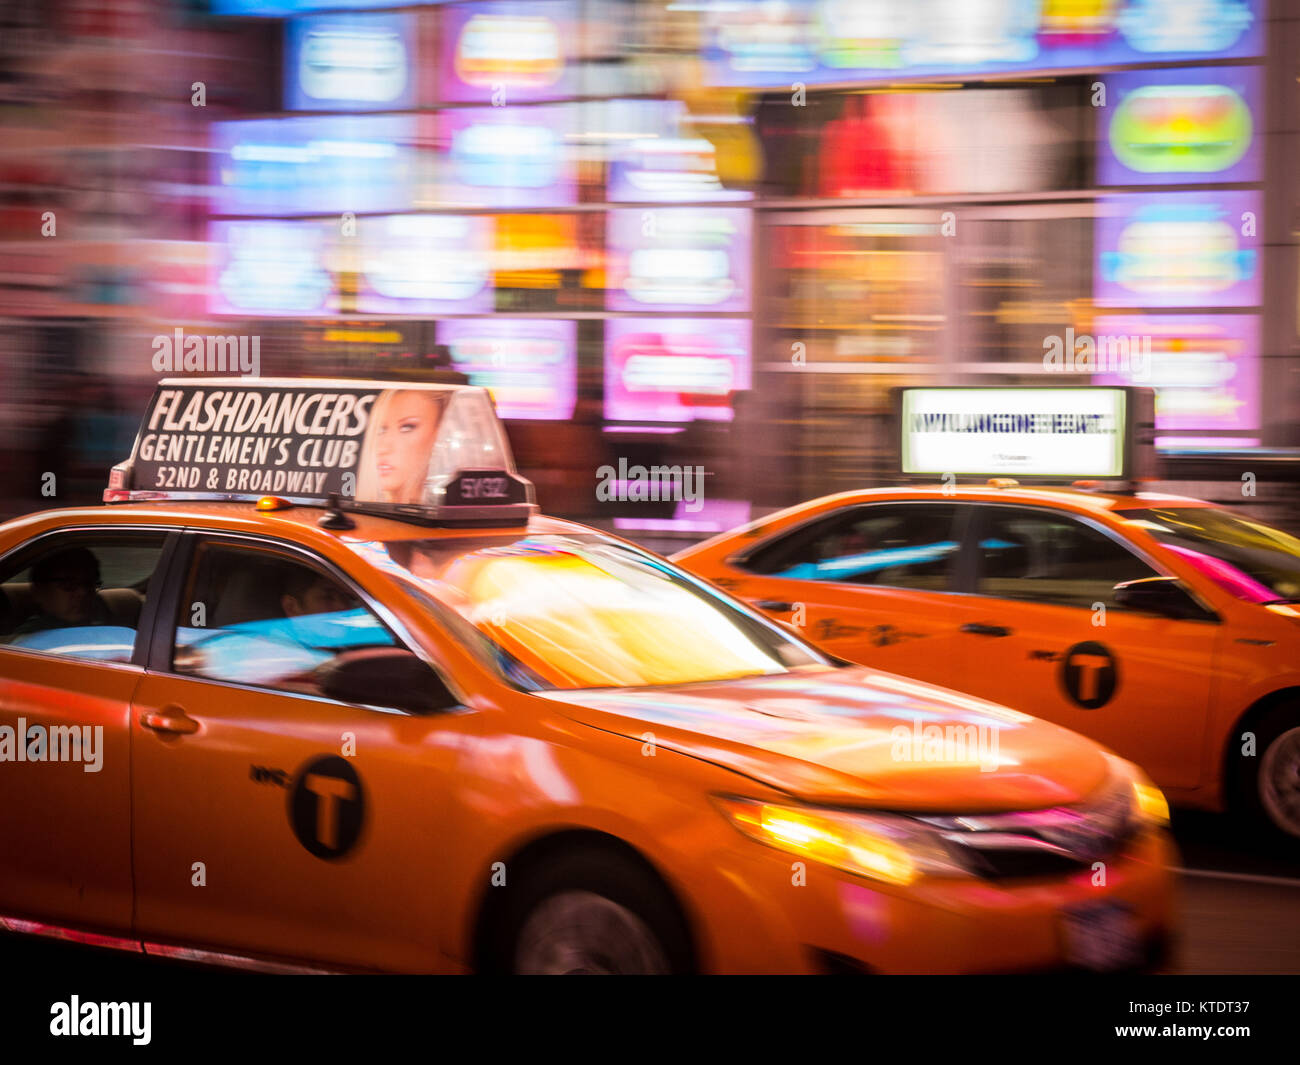 NEW YORK TIME SQUARE PANNING YELLOW TAXI BILLBOARD REFLECTIONS Stock Photo